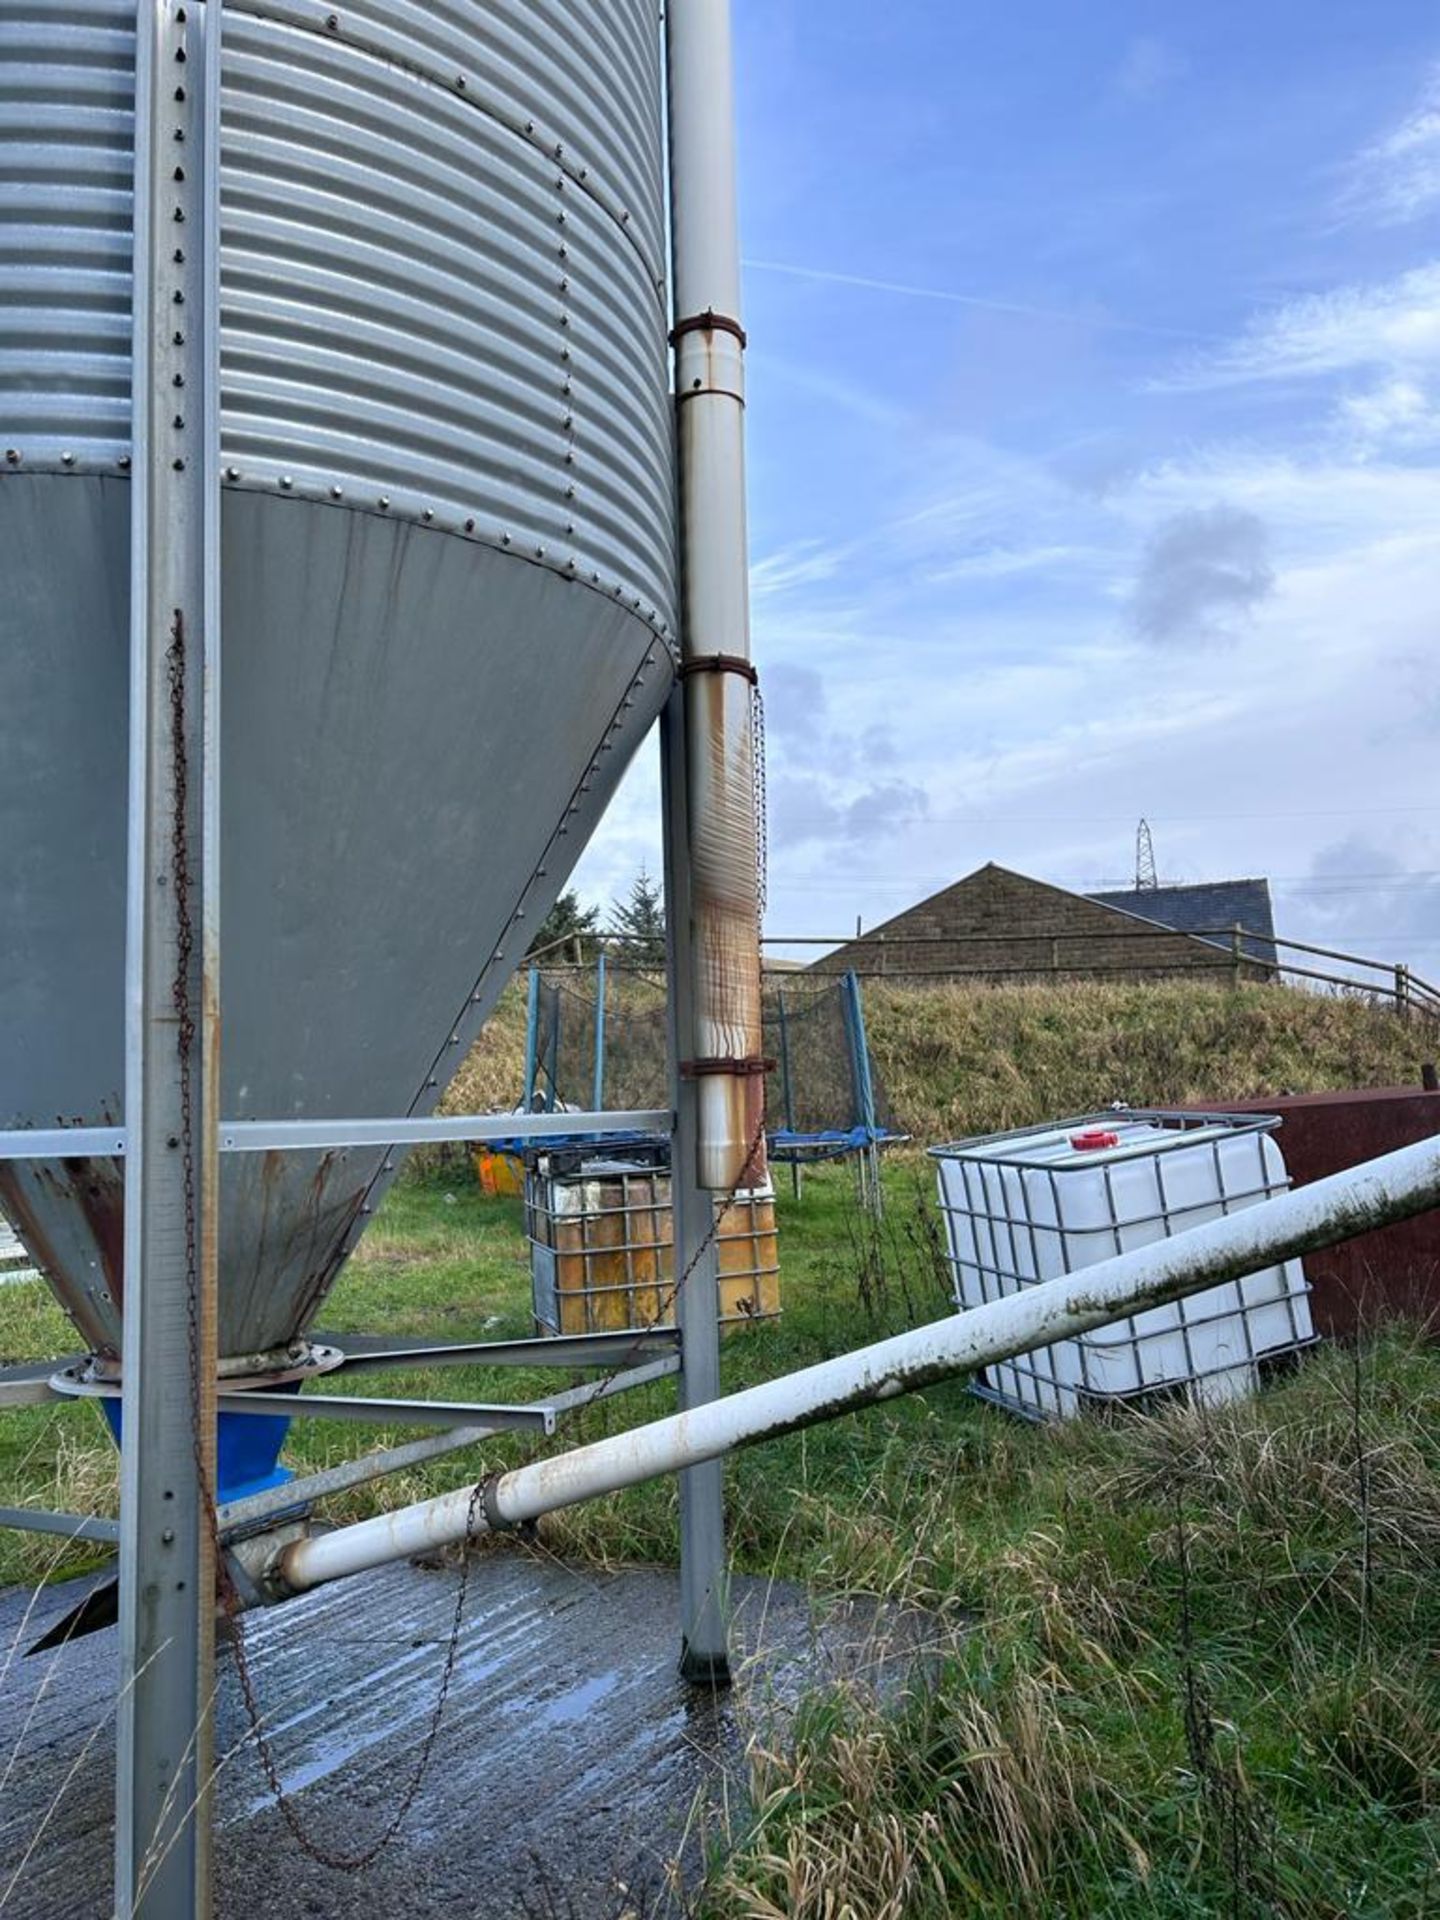 BIG DUTCHMAN GRAIN SILO NO VAT TO BE COLLECTED FROM OLDHAM OL15 0RA THE VENDOR WILL DELIVER AT A - Image 2 of 5